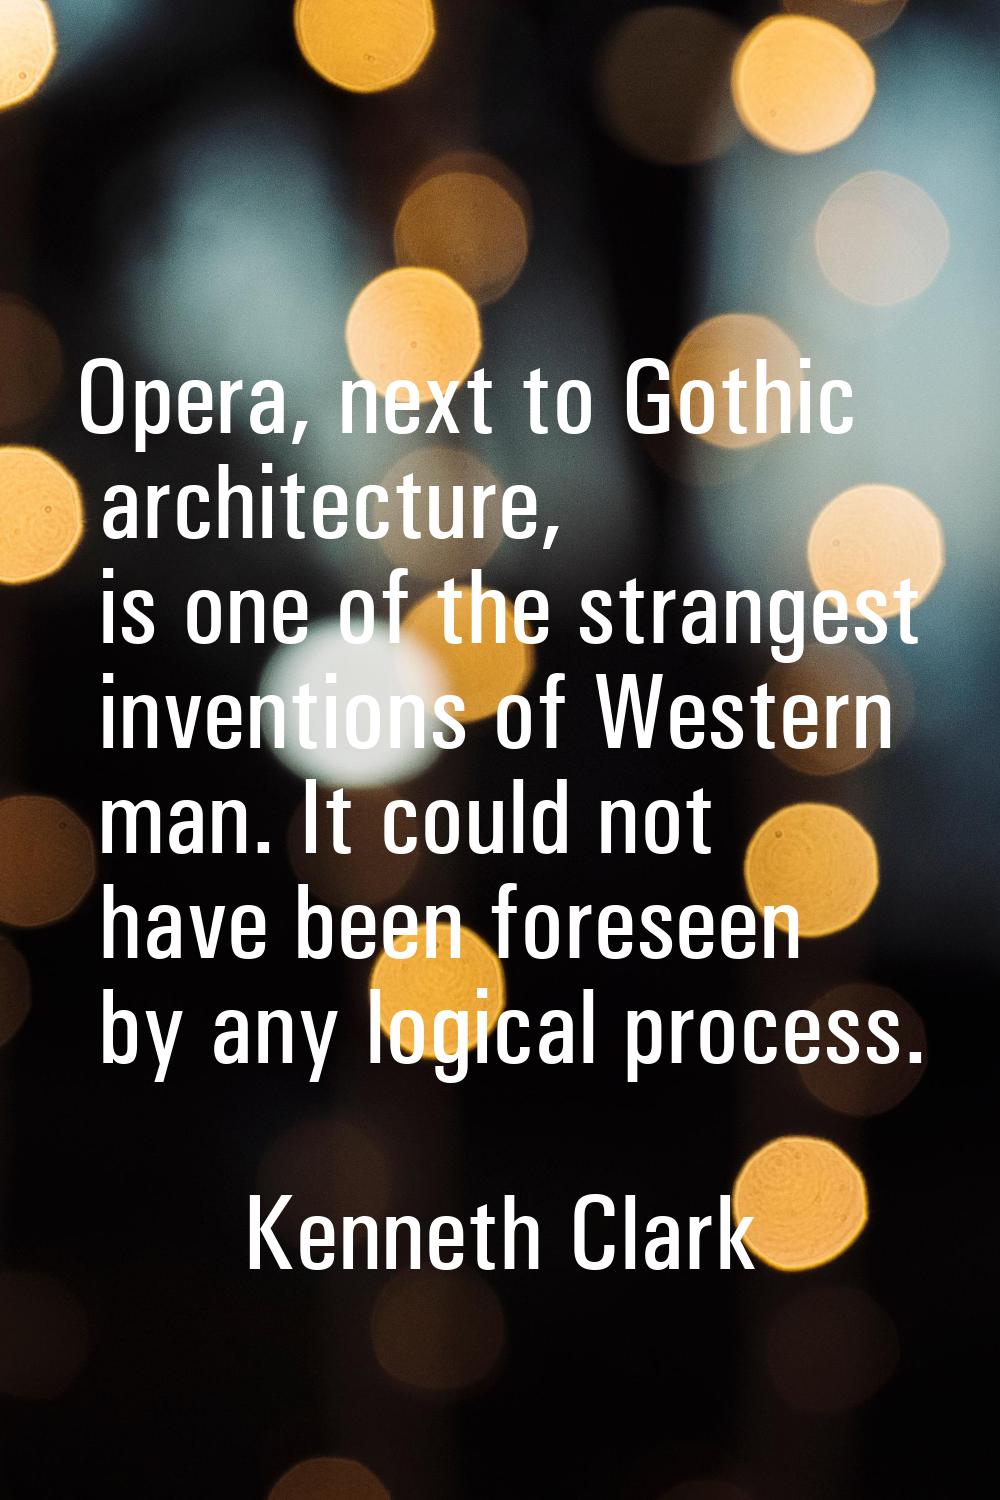 Opera, next to Gothic architecture, is one of the strangest inventions of Western man. It could not